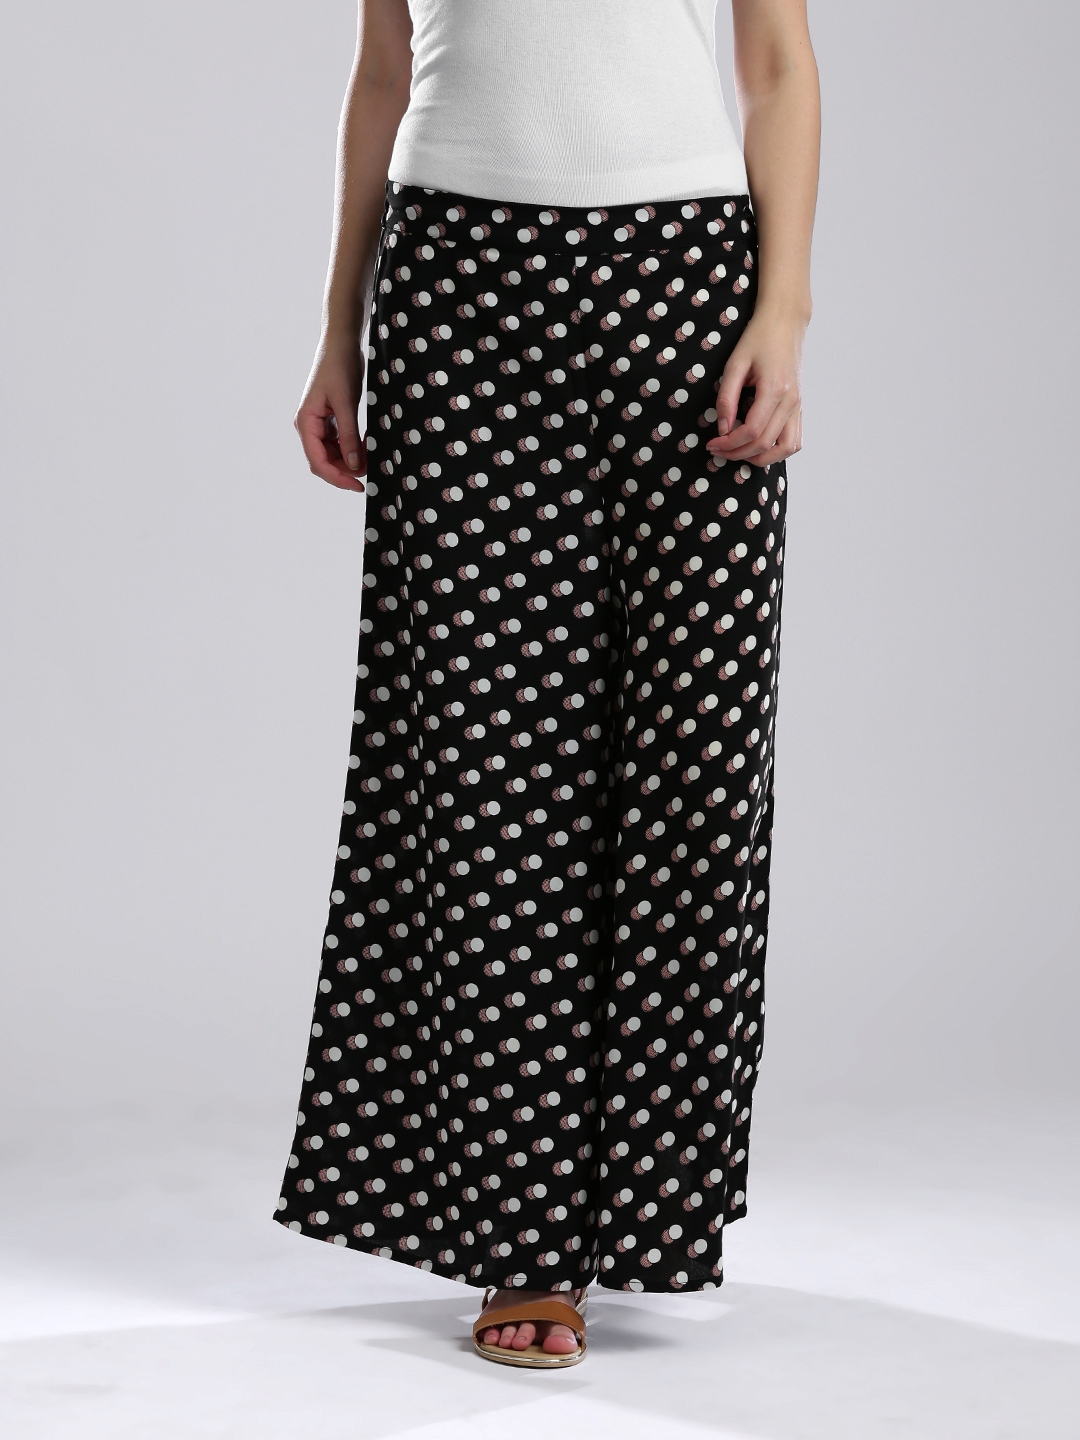 Shop Polka Dot Palazzo Pants for Women from latest collection at Forever 21   369870